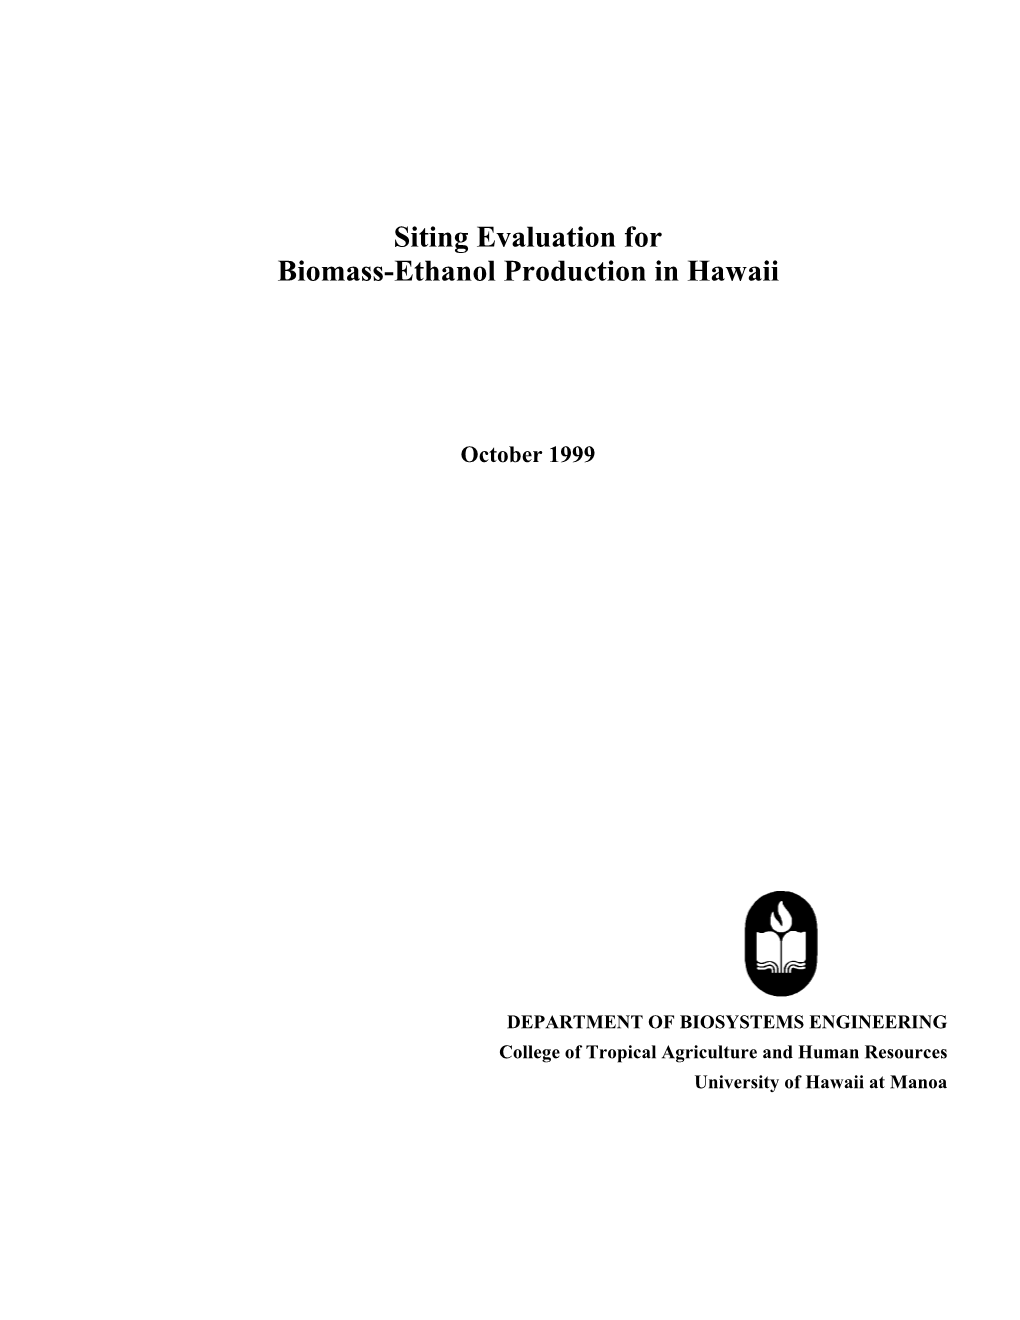 Siting Evaluation for Biomass-Ethanol Production in Hawaii